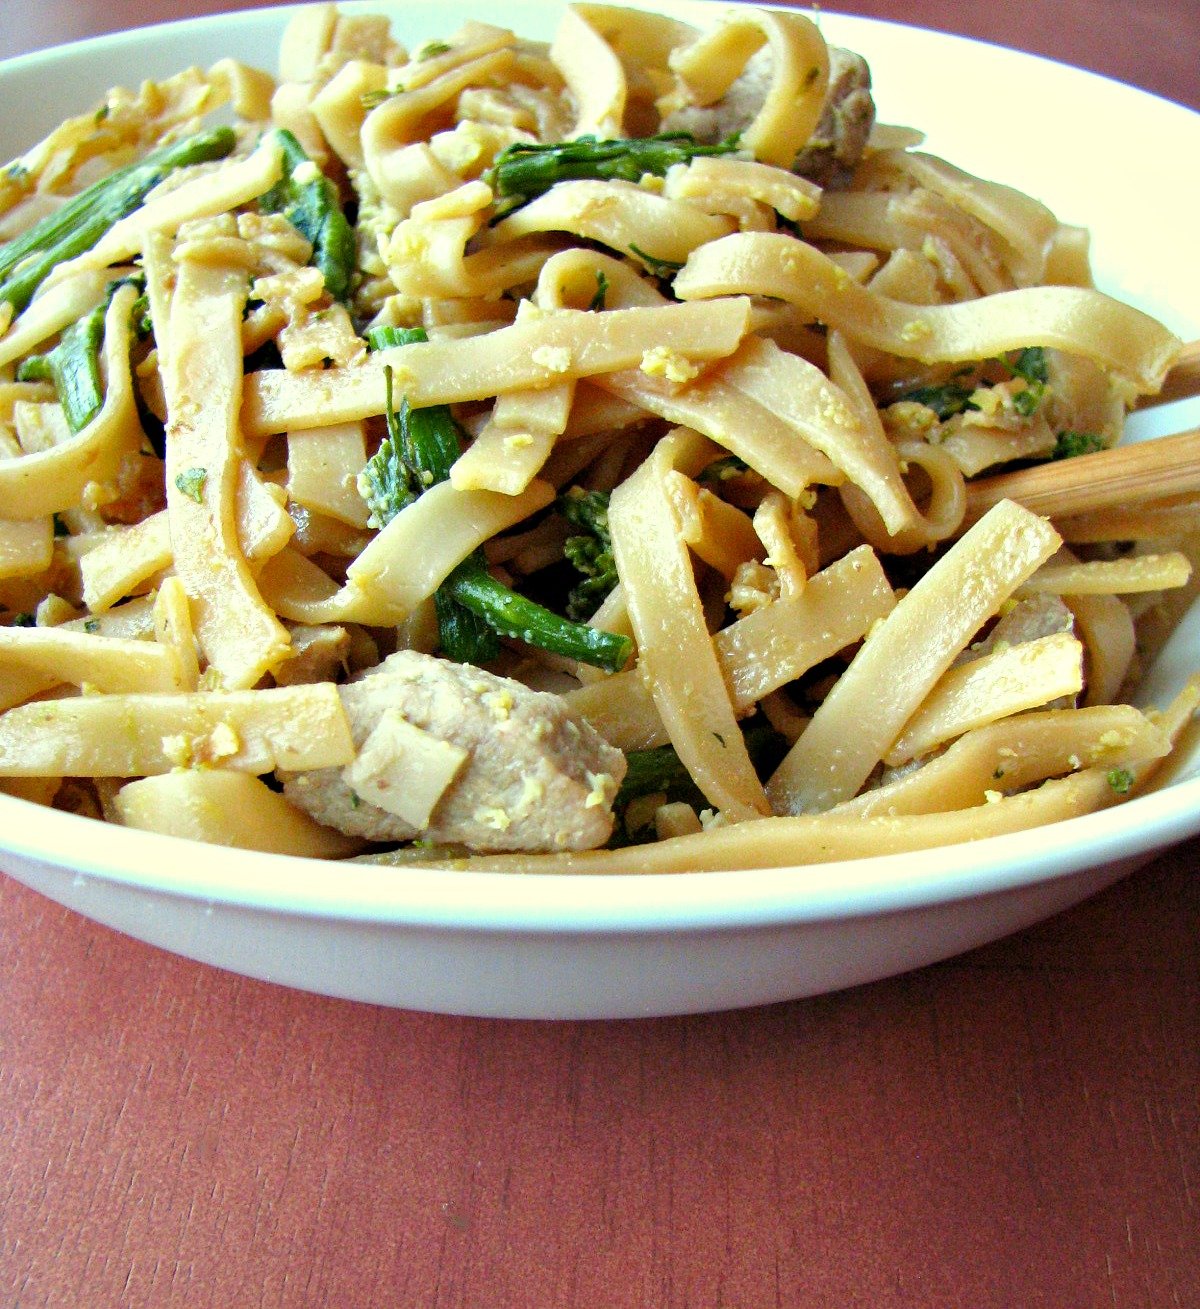 Pad See Ew ( meaning "fried with soy sauce") is made with large rice noodles, pork loin, broccoli, and scrambled eggs fried in soy sauce. Makes a great weeknight dinner and better than takeout! 